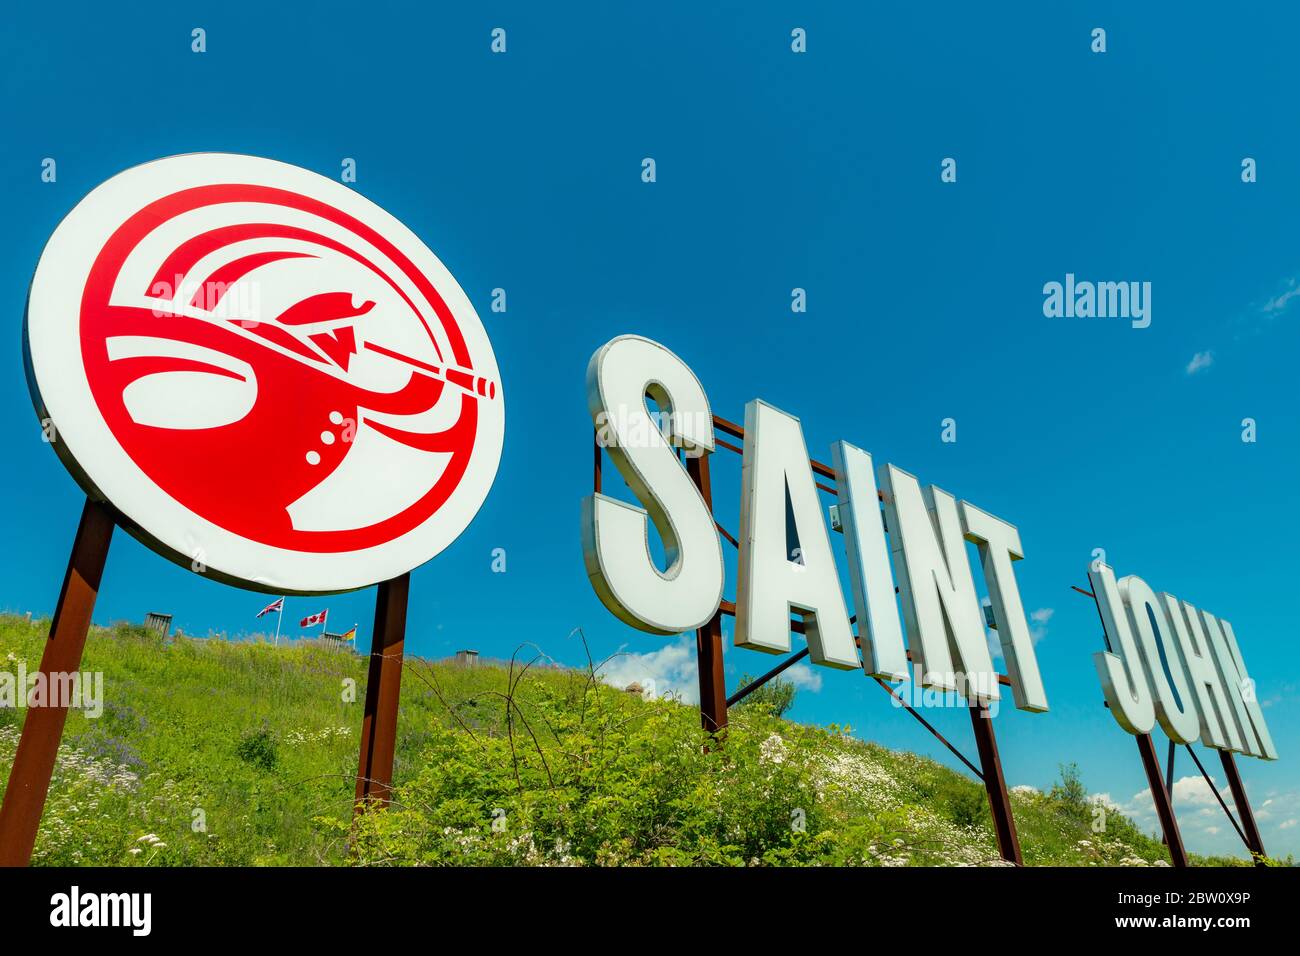 Saint John, NB, Canada - July 20, 2019: The 'Saint John' sign overlooks the harbor from Fort Howe. The cities 'Loyalist' logo is to the left of the si Stock Photo